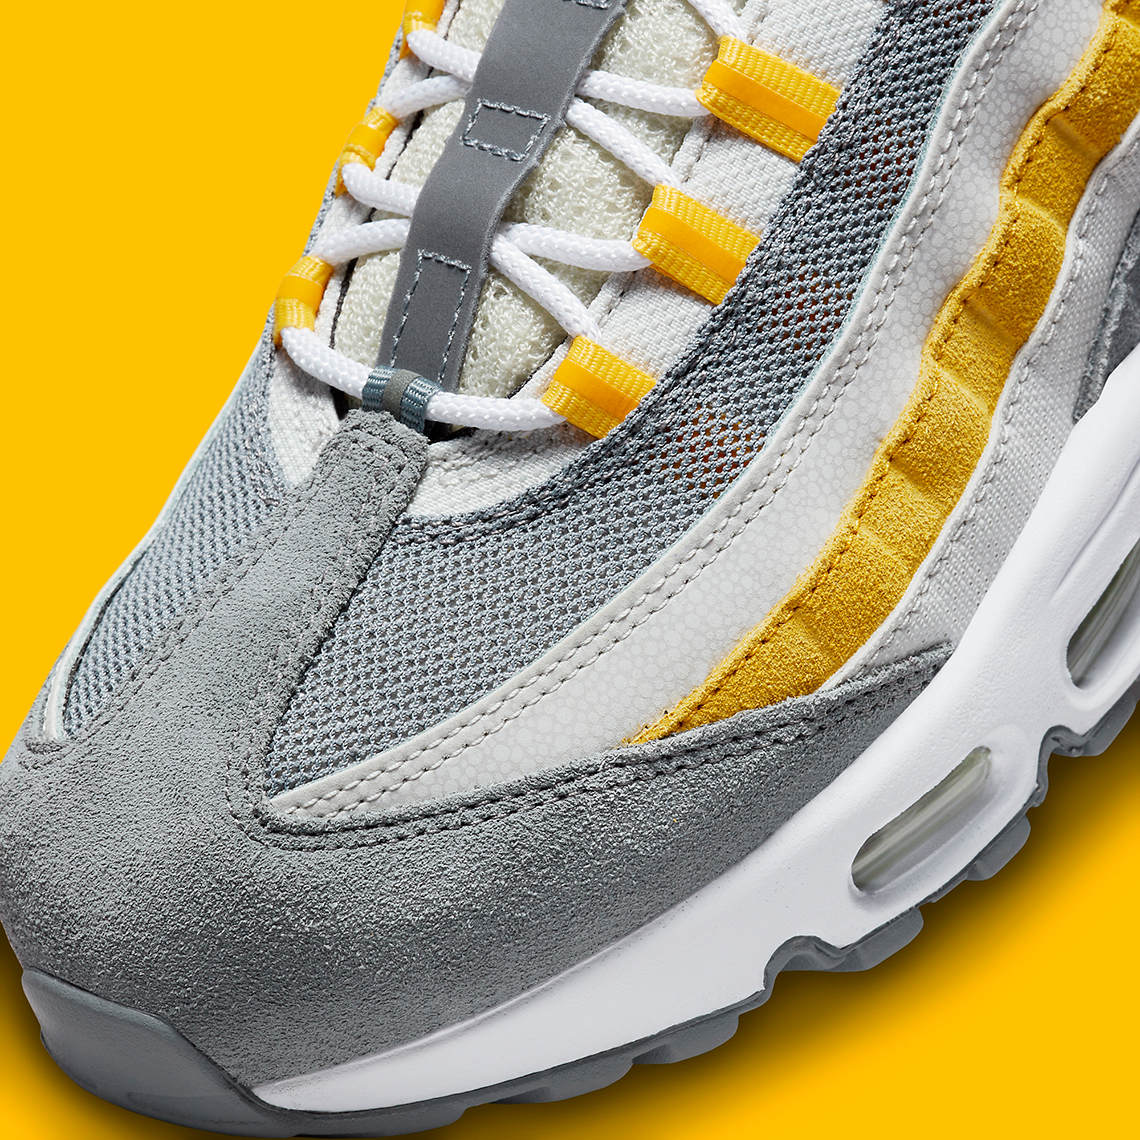 nike tennessee air max 95 grey yellow DM0011 010 1